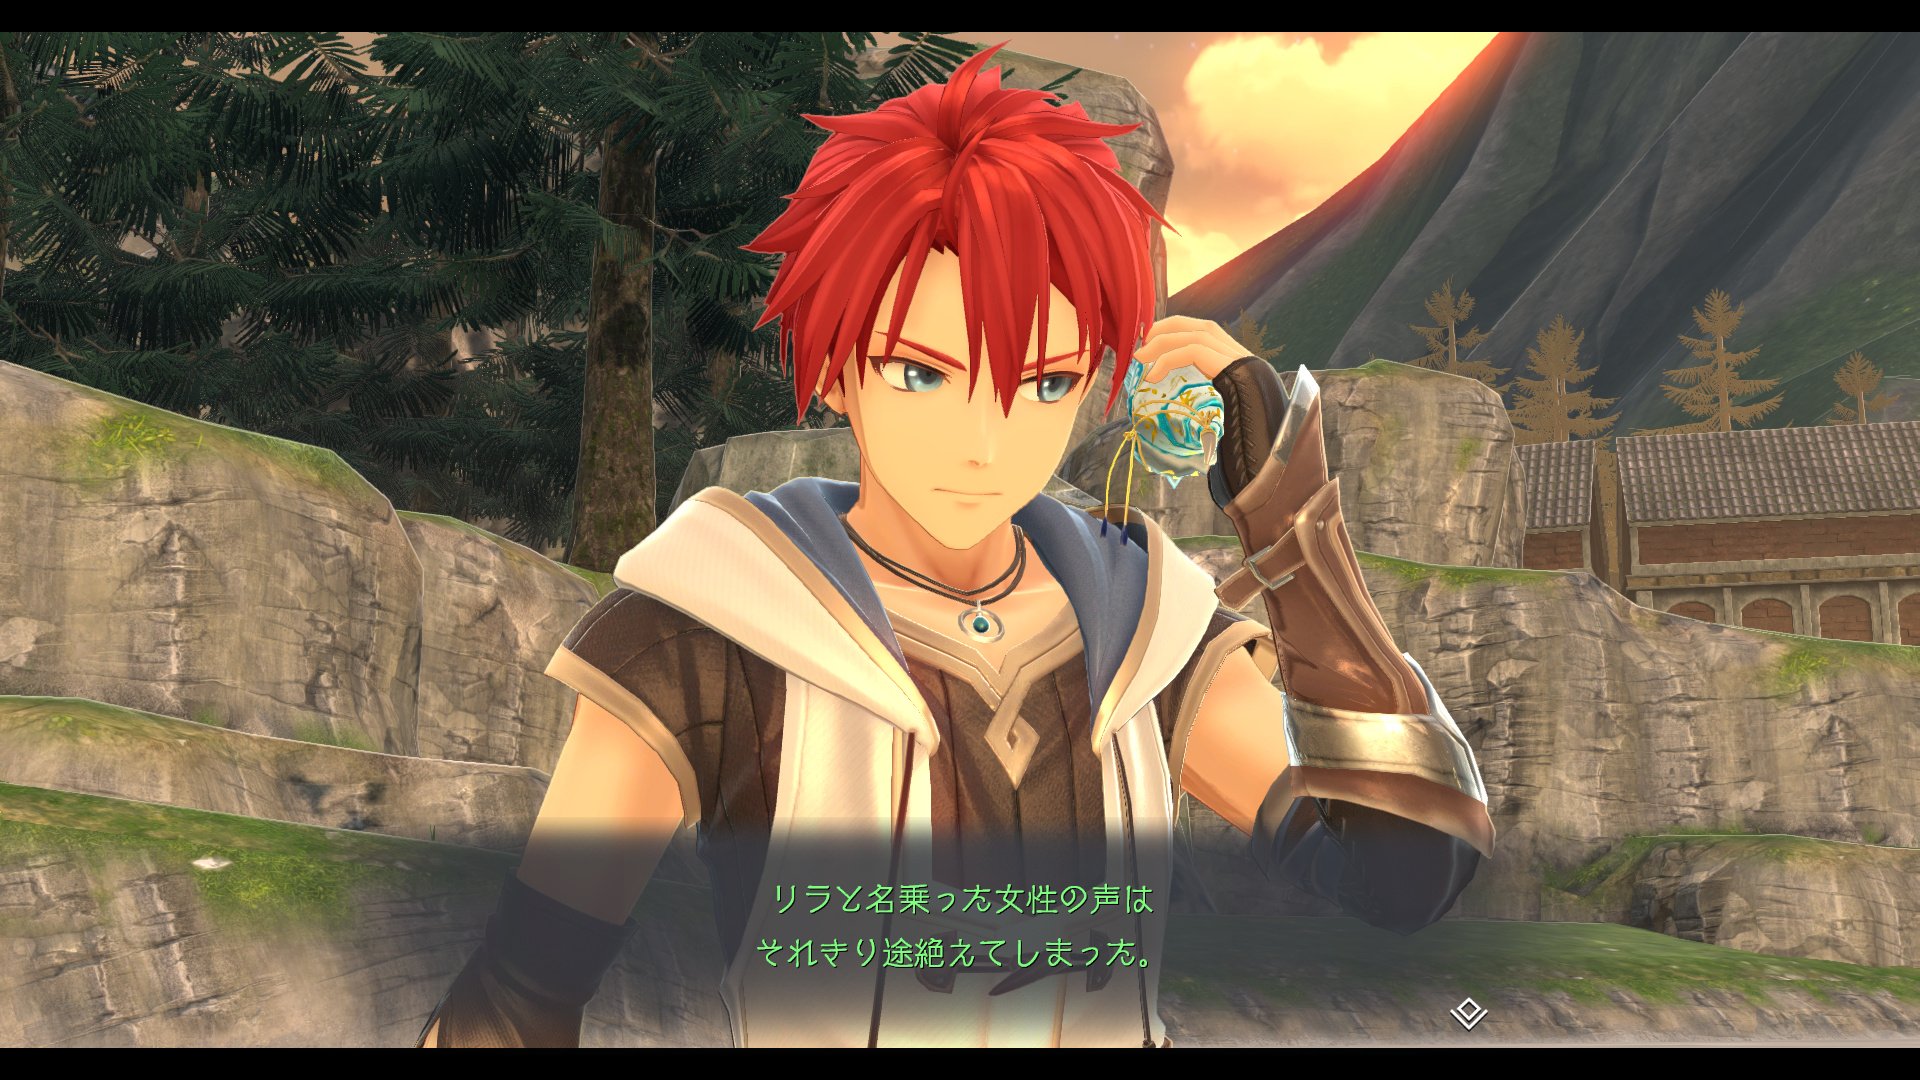 Ys X: Nordics & Ys Memoire: The Oath in Felghana coming to Switch in 2023 -  My Nintendo News